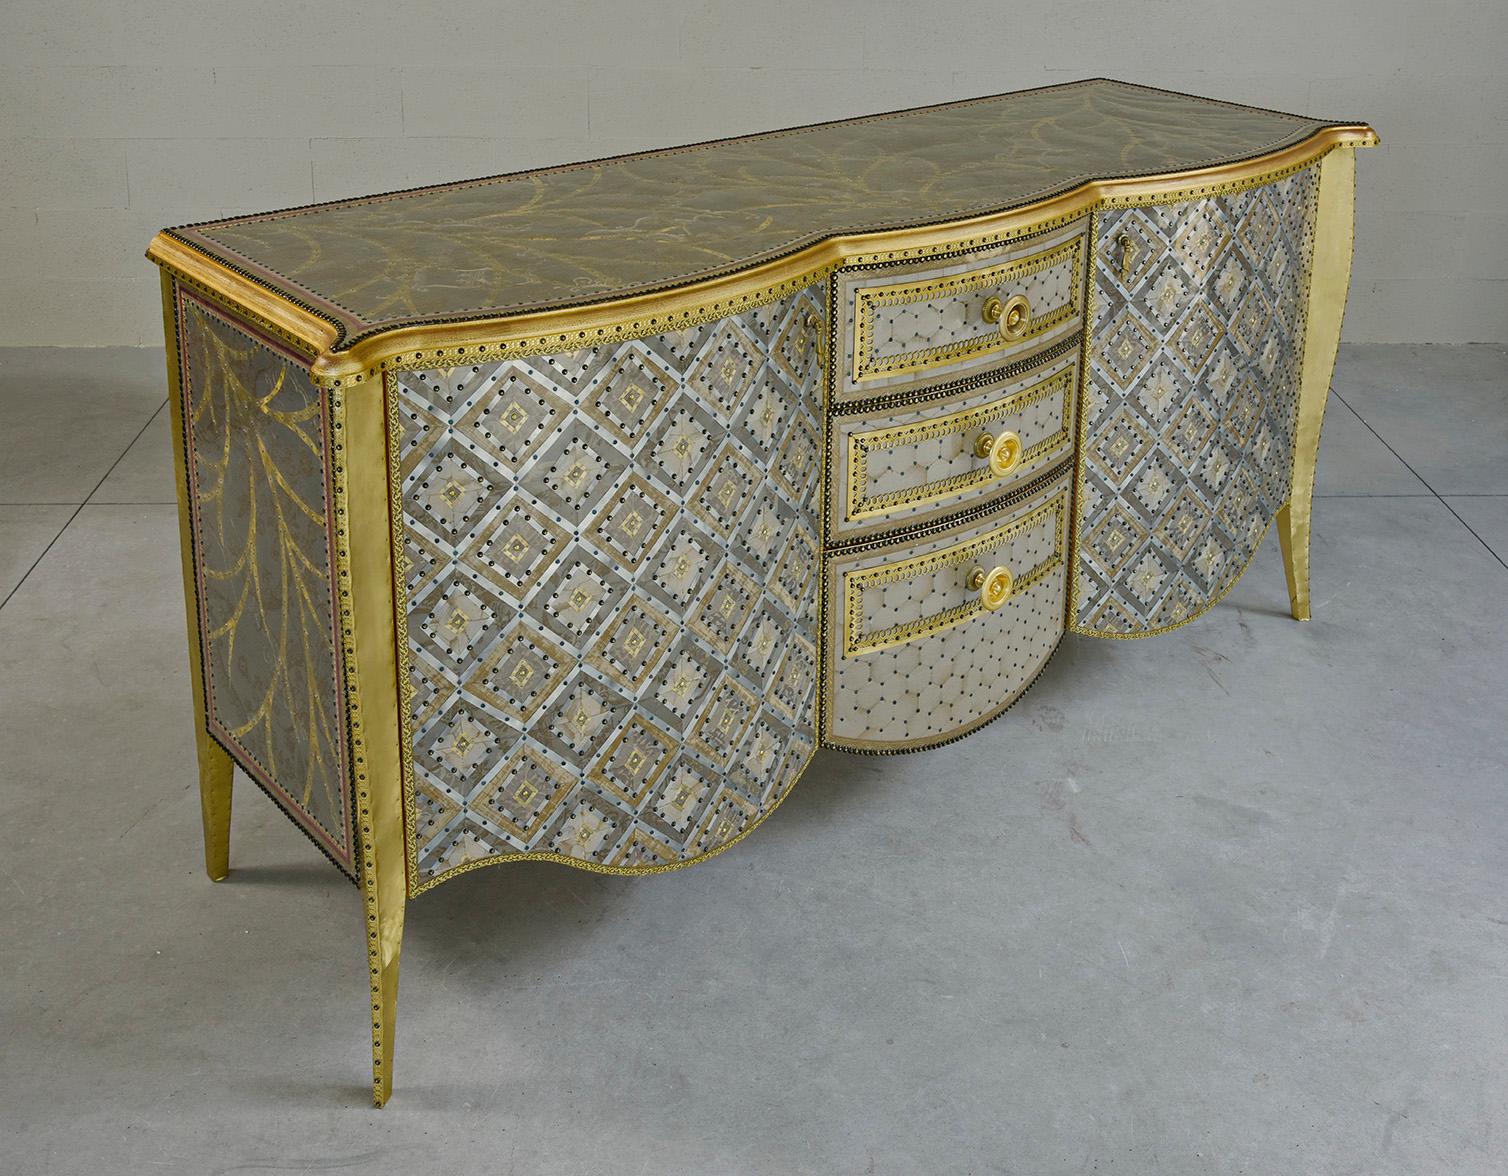 Modern Contemporary Valentina Giovando Sideboard Buffet Wood Brass Gold Silver Large For Sale